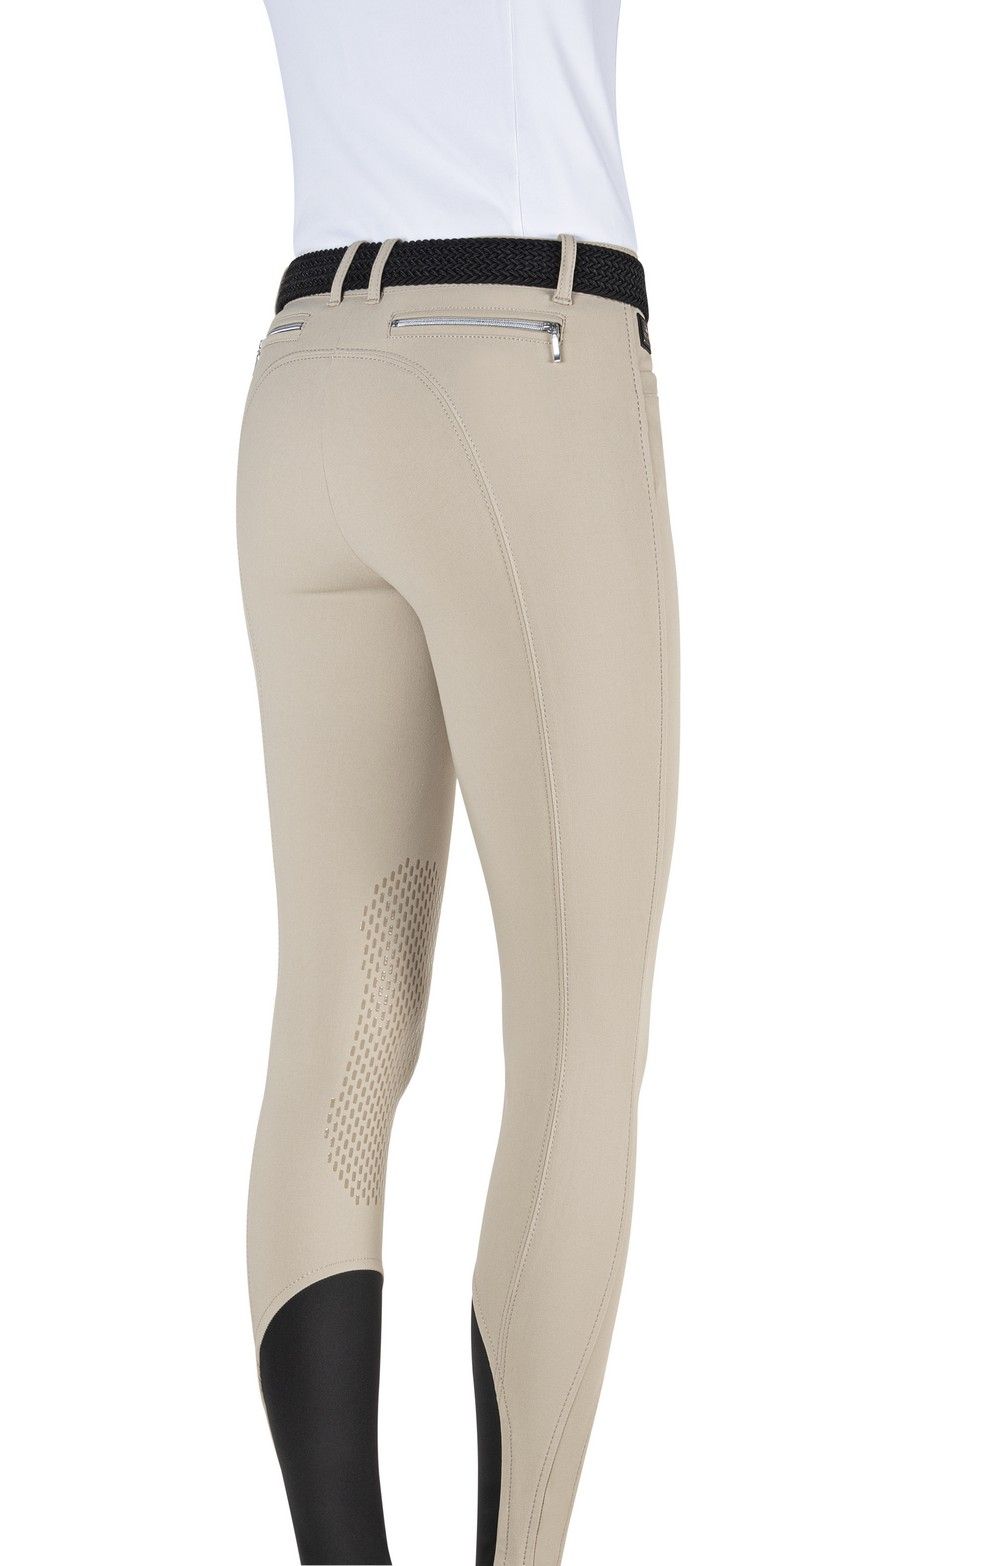 Equiline riding breeches knee grip Ash Beige